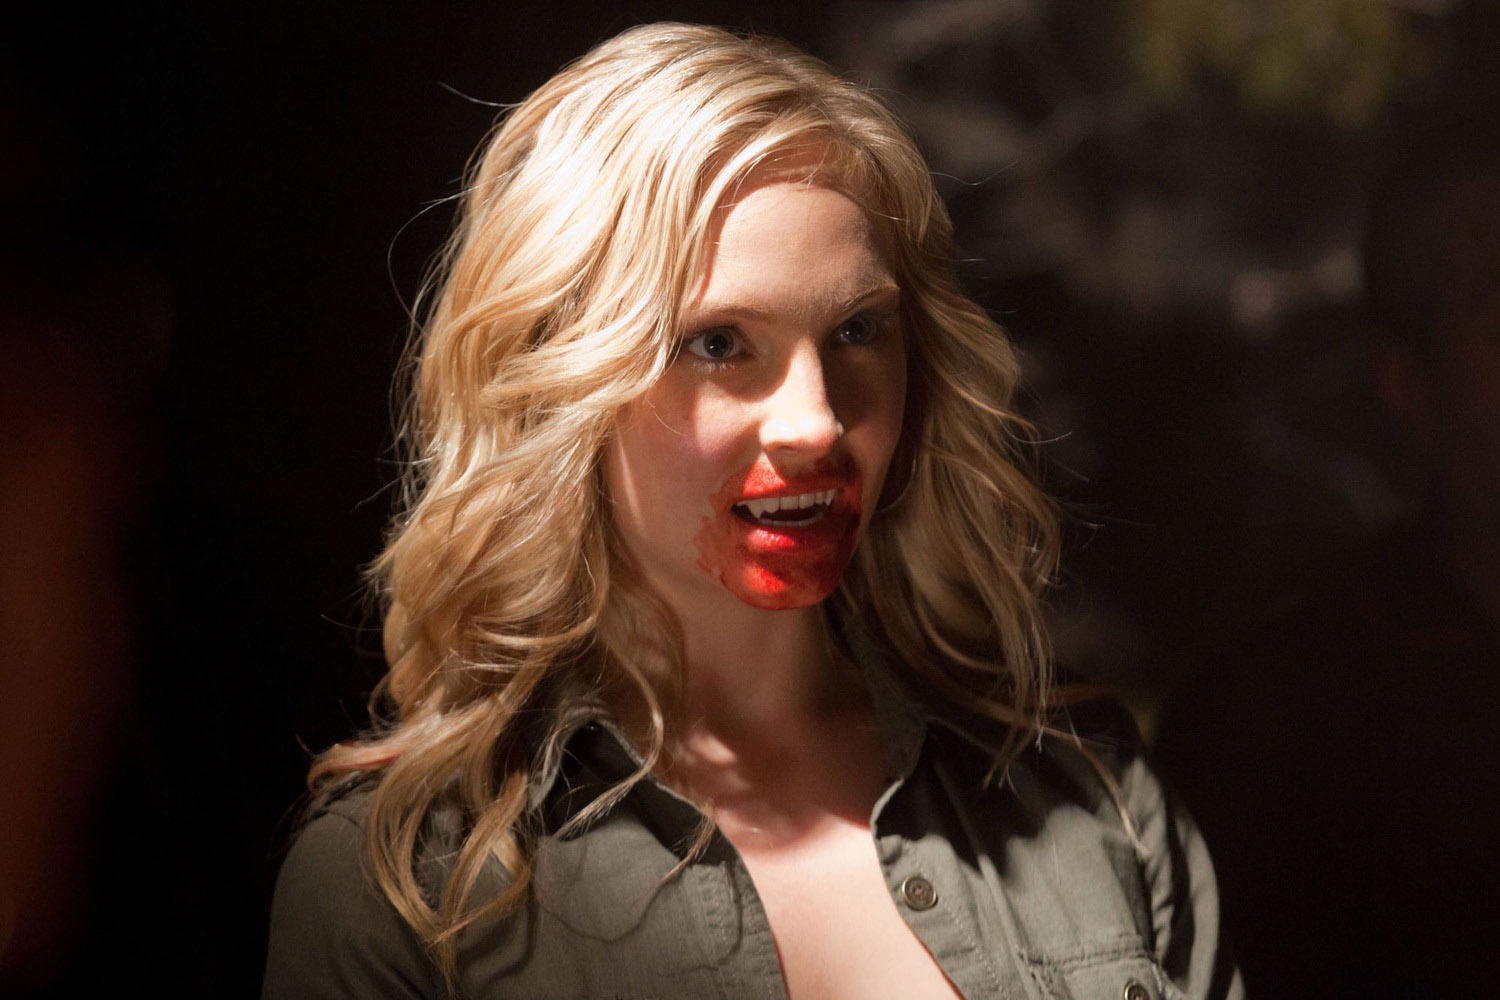 5 Vampire Diaries Characters with Highest Kill Count (No. 5 Alone Has 19 Victims) - image 1